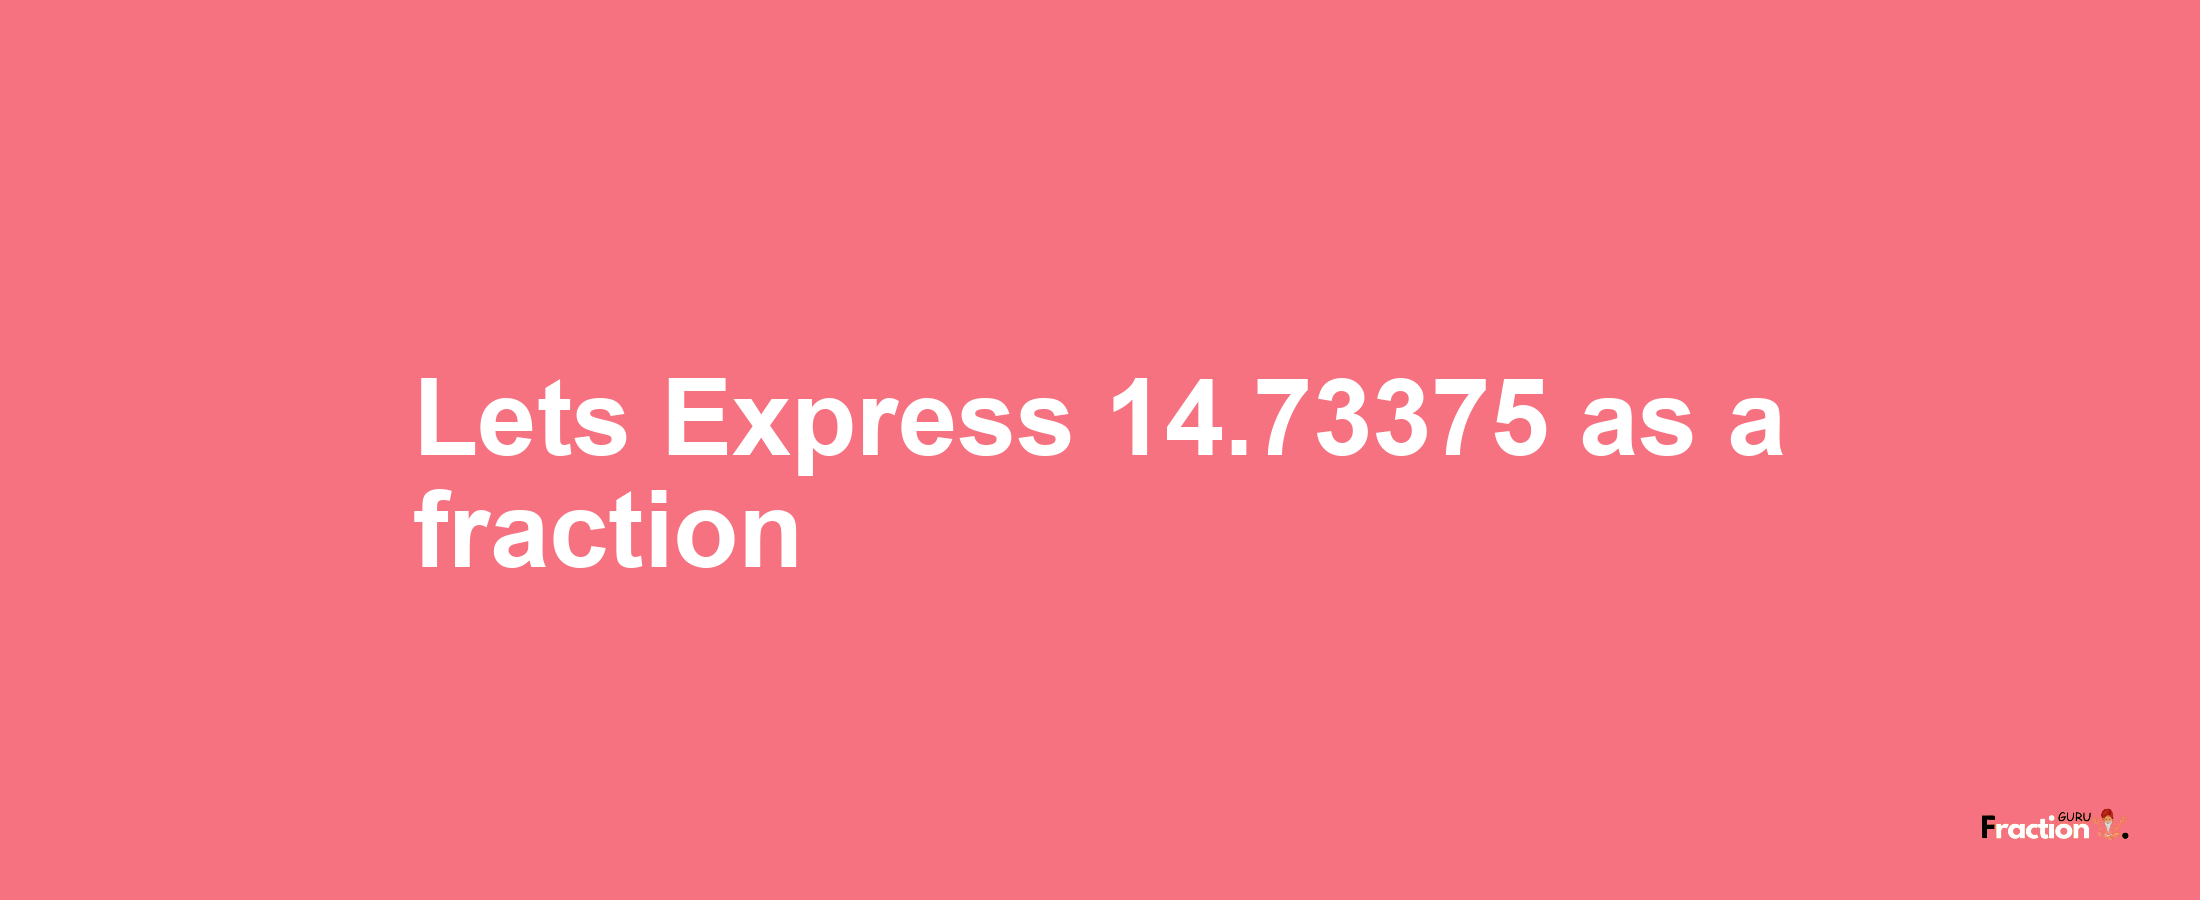 Lets Express 14.73375 as afraction